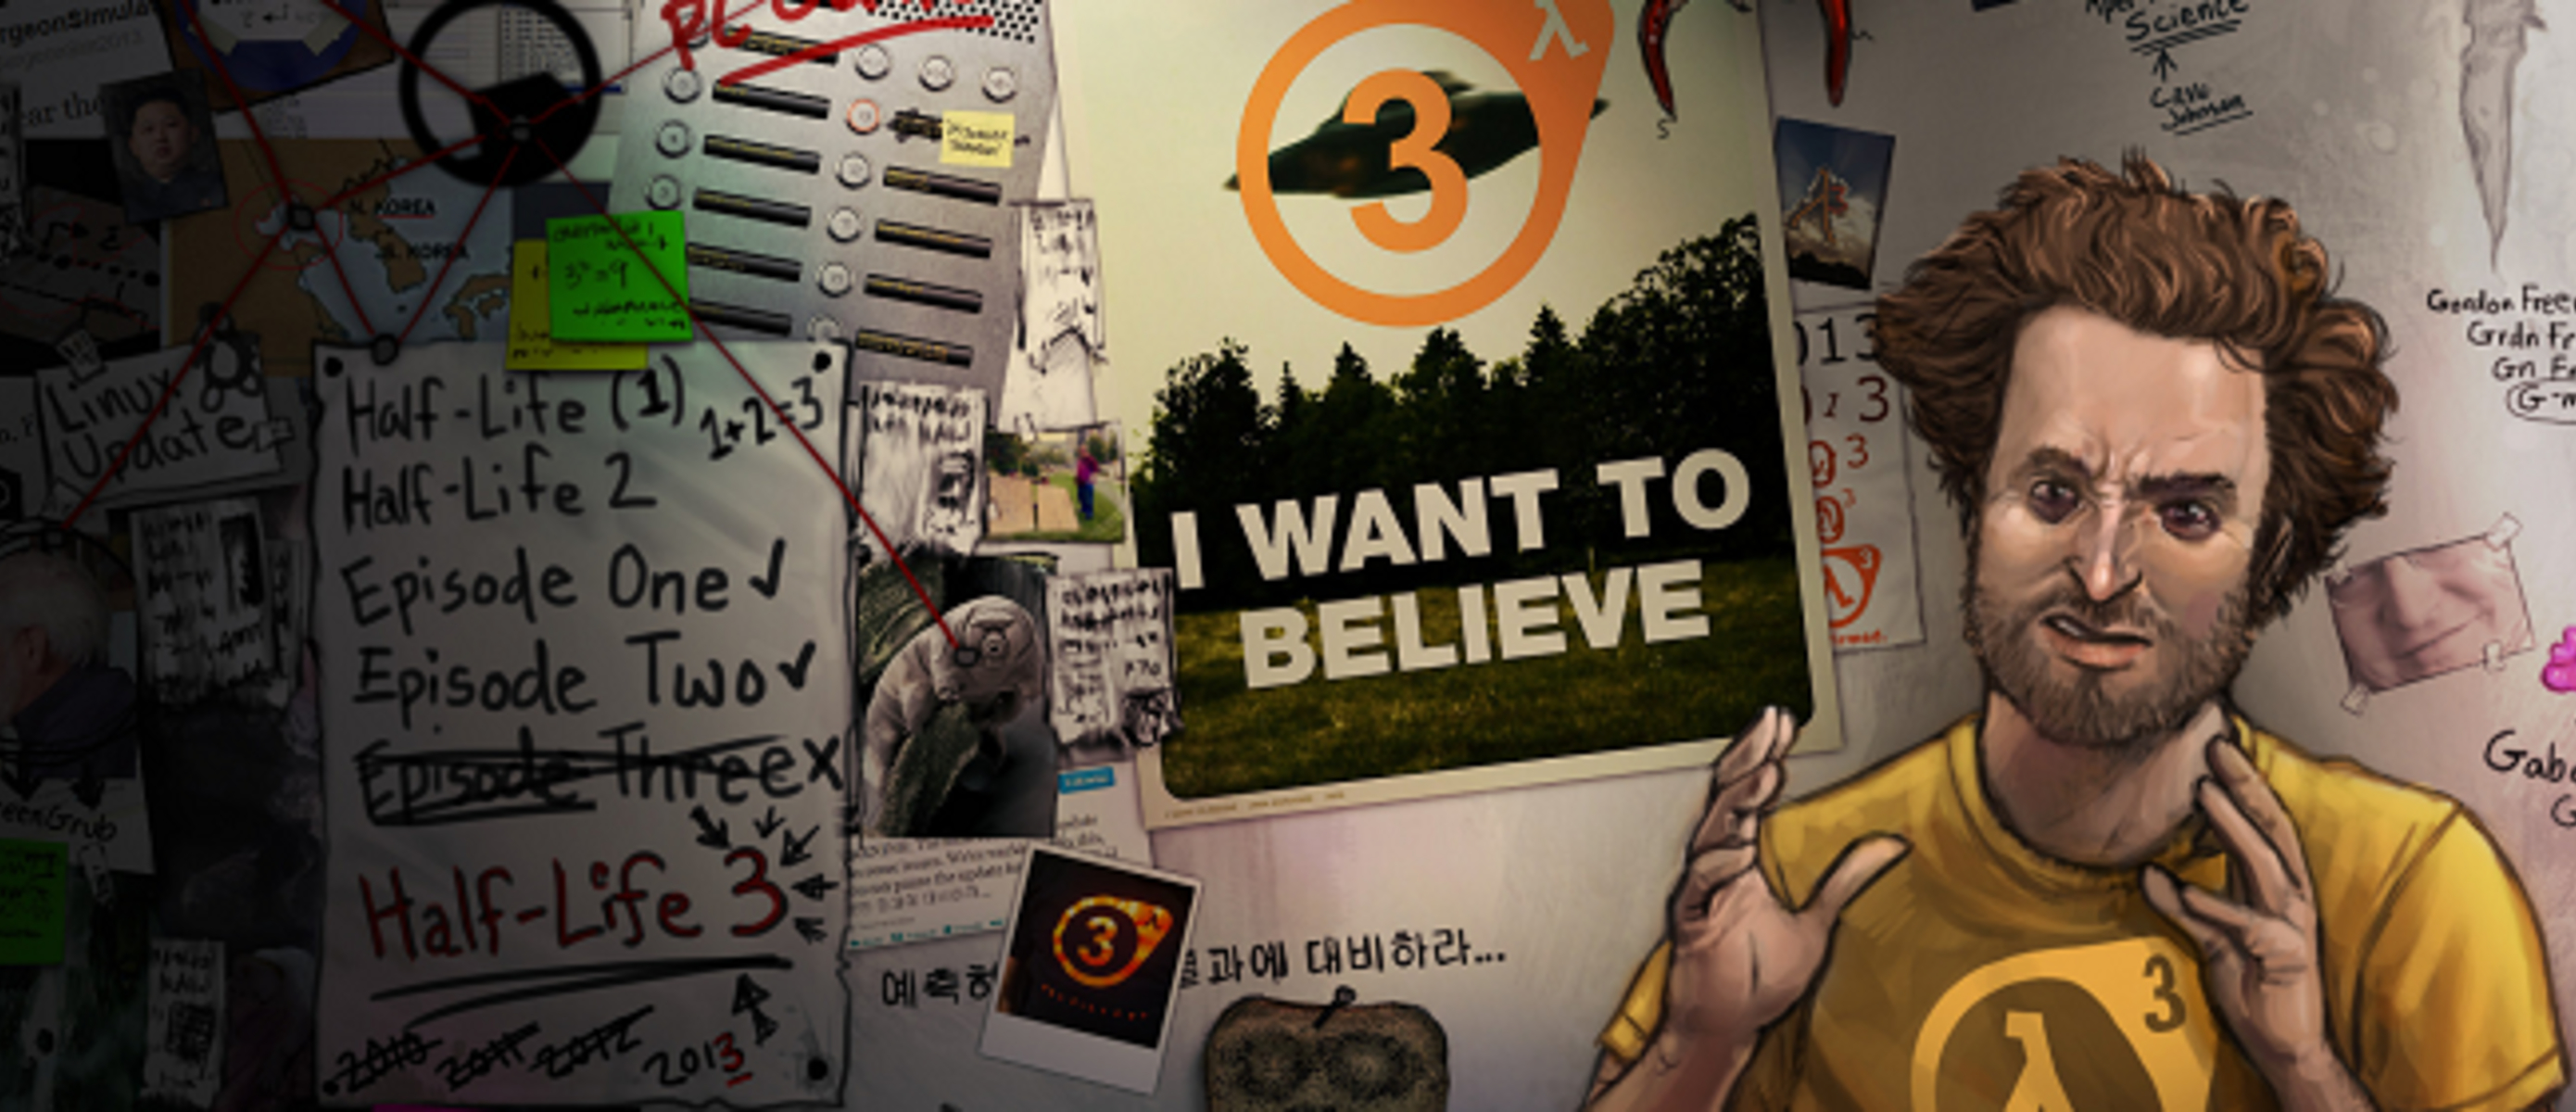 Want to have my life. I want to believe half Life 3. Half Life 3? Half Life 1.5. Half Life 3 confirmed. Valve игры.